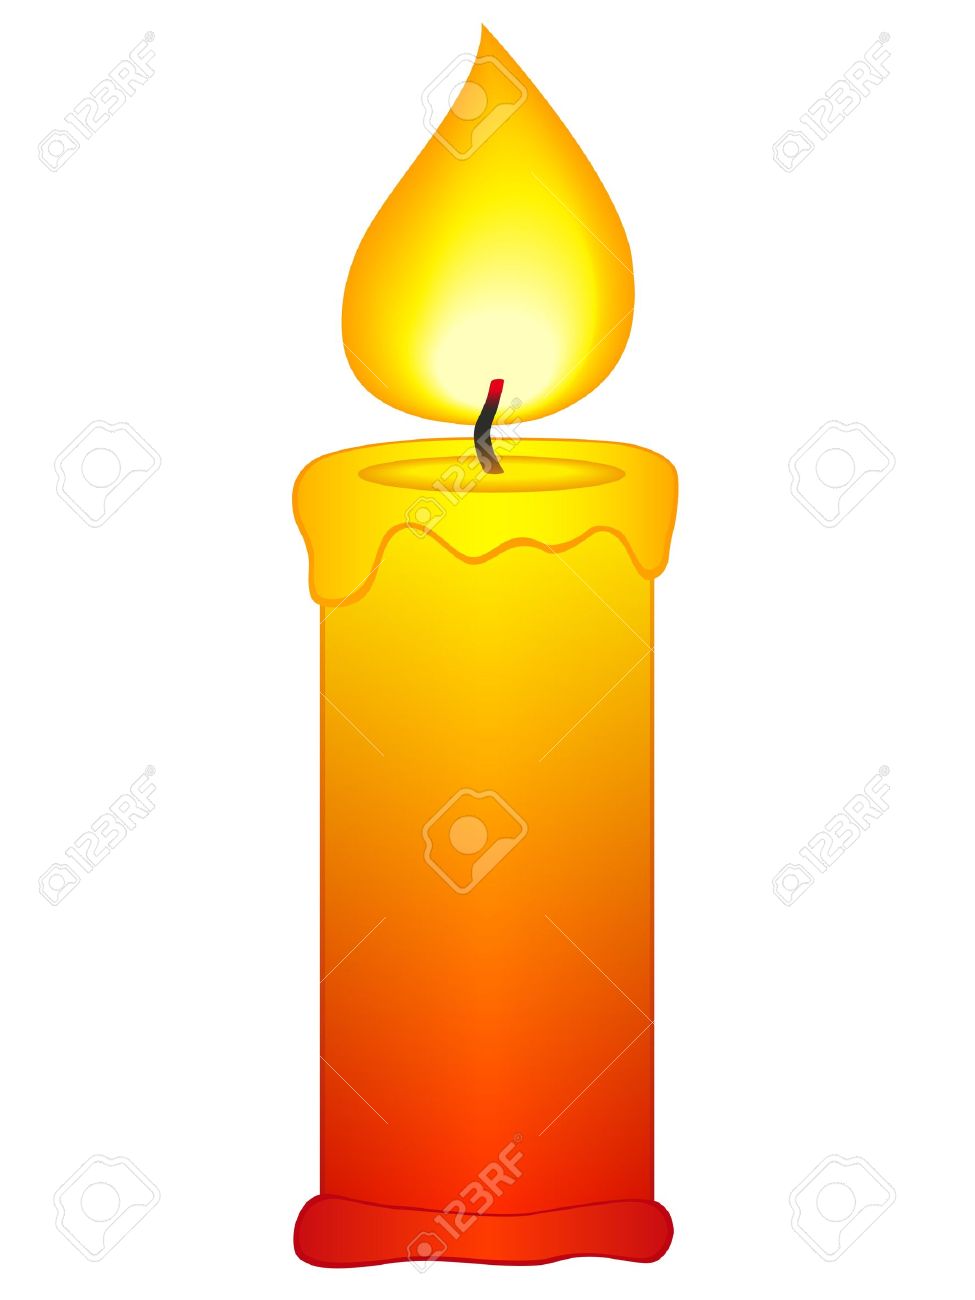 Candle Clip Art u0026amp; Can - Candle Images Clip Art